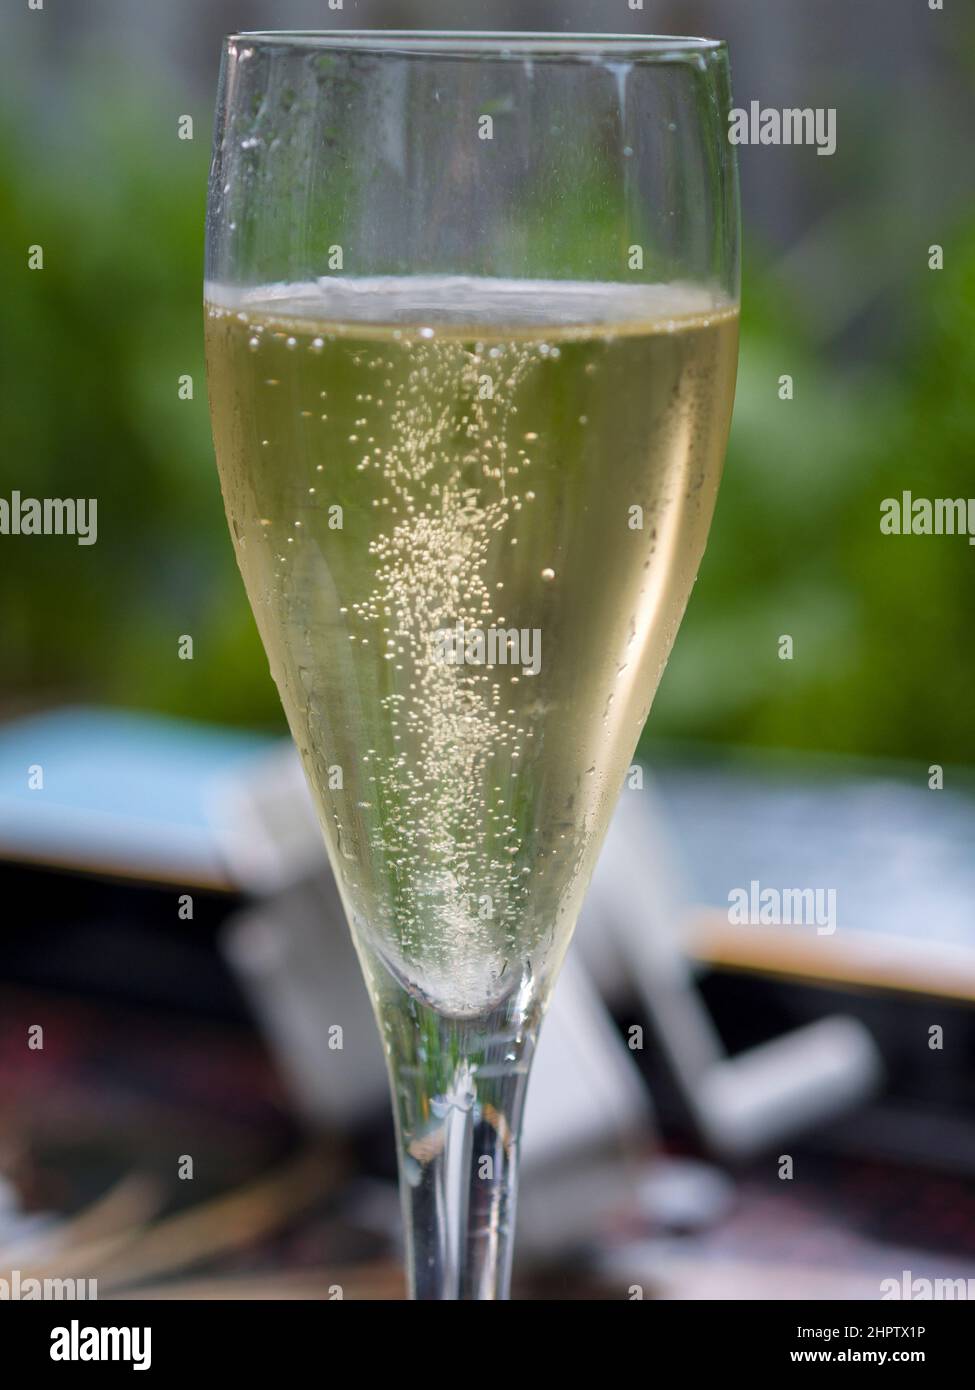 A glass of sparkling white wine: Bubbles rise up in a flute of sparkling white wine from the Loire region in France. Stock Photo